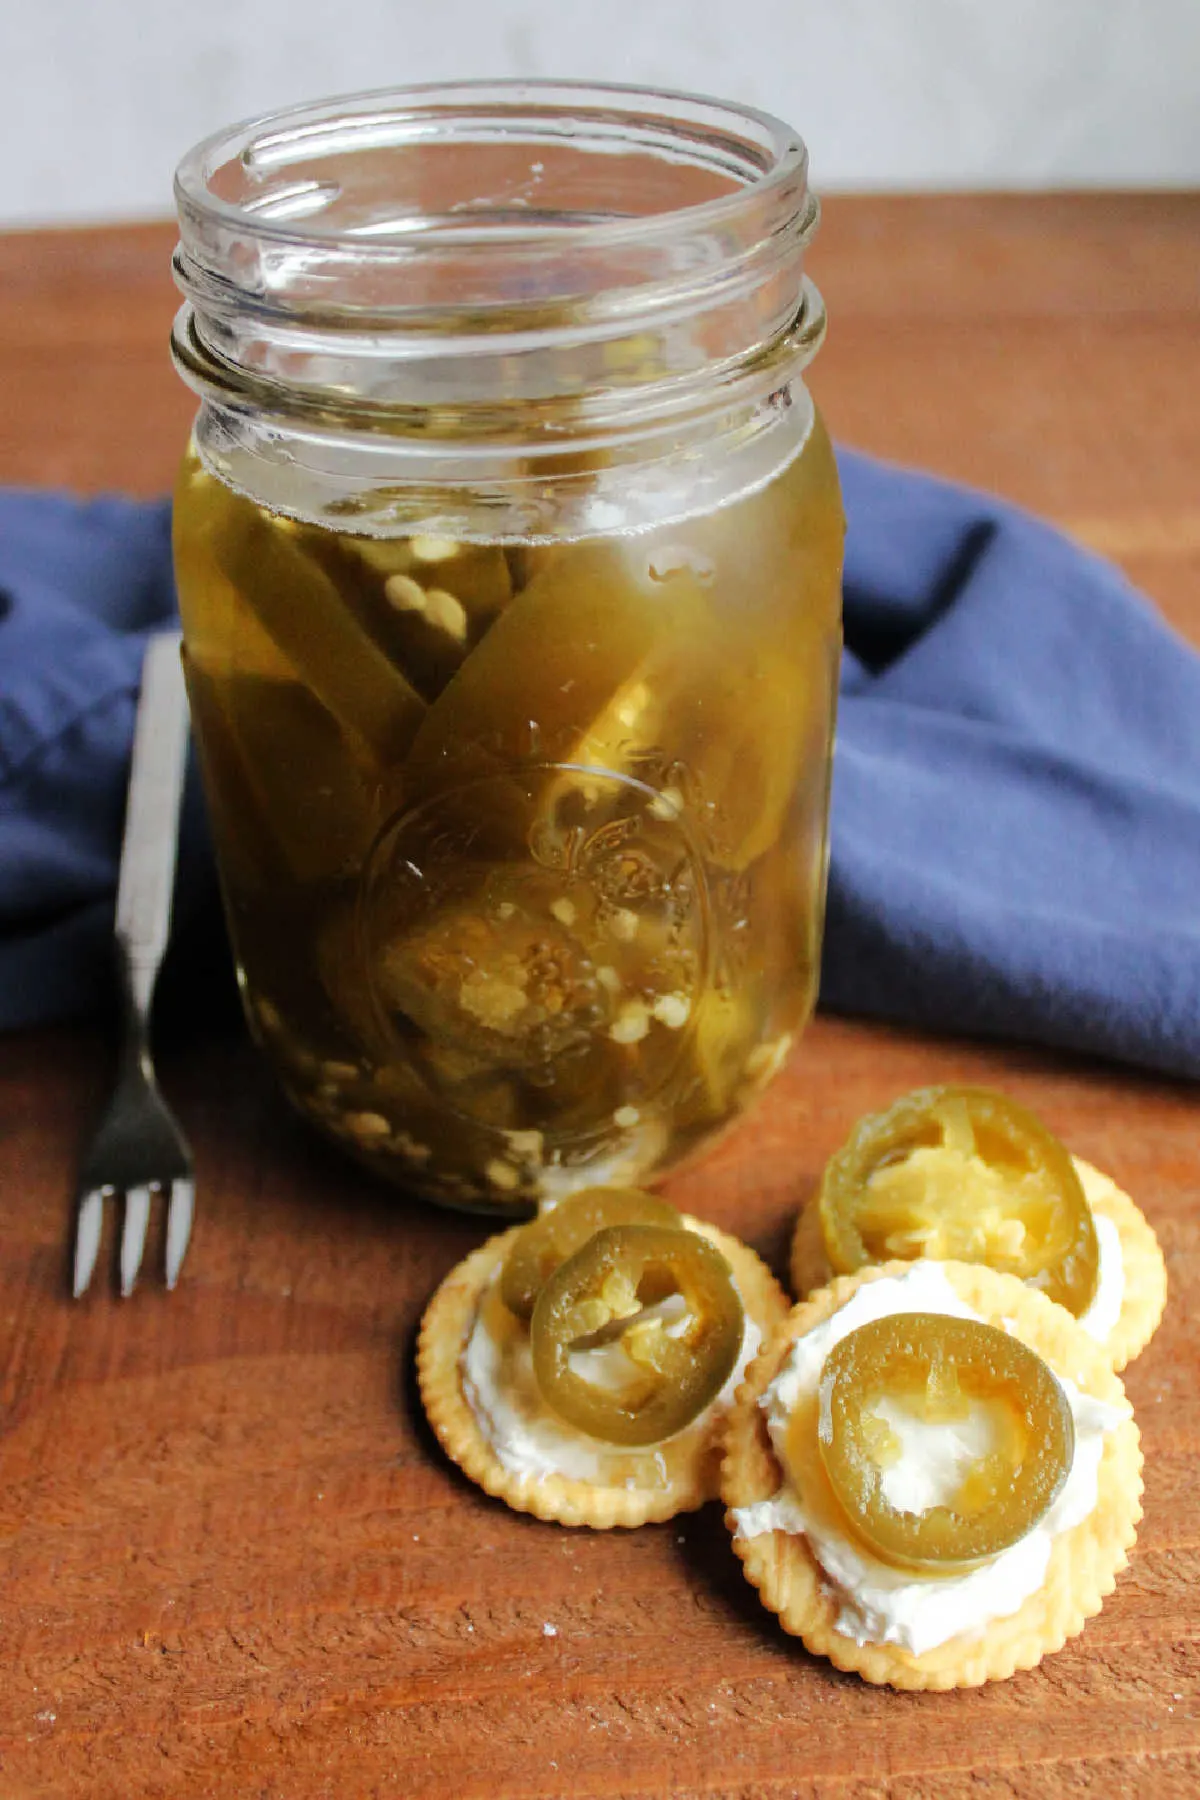 Crackers topped with cream cheese and candied jalapeno rings next to jar of cowboy candy.